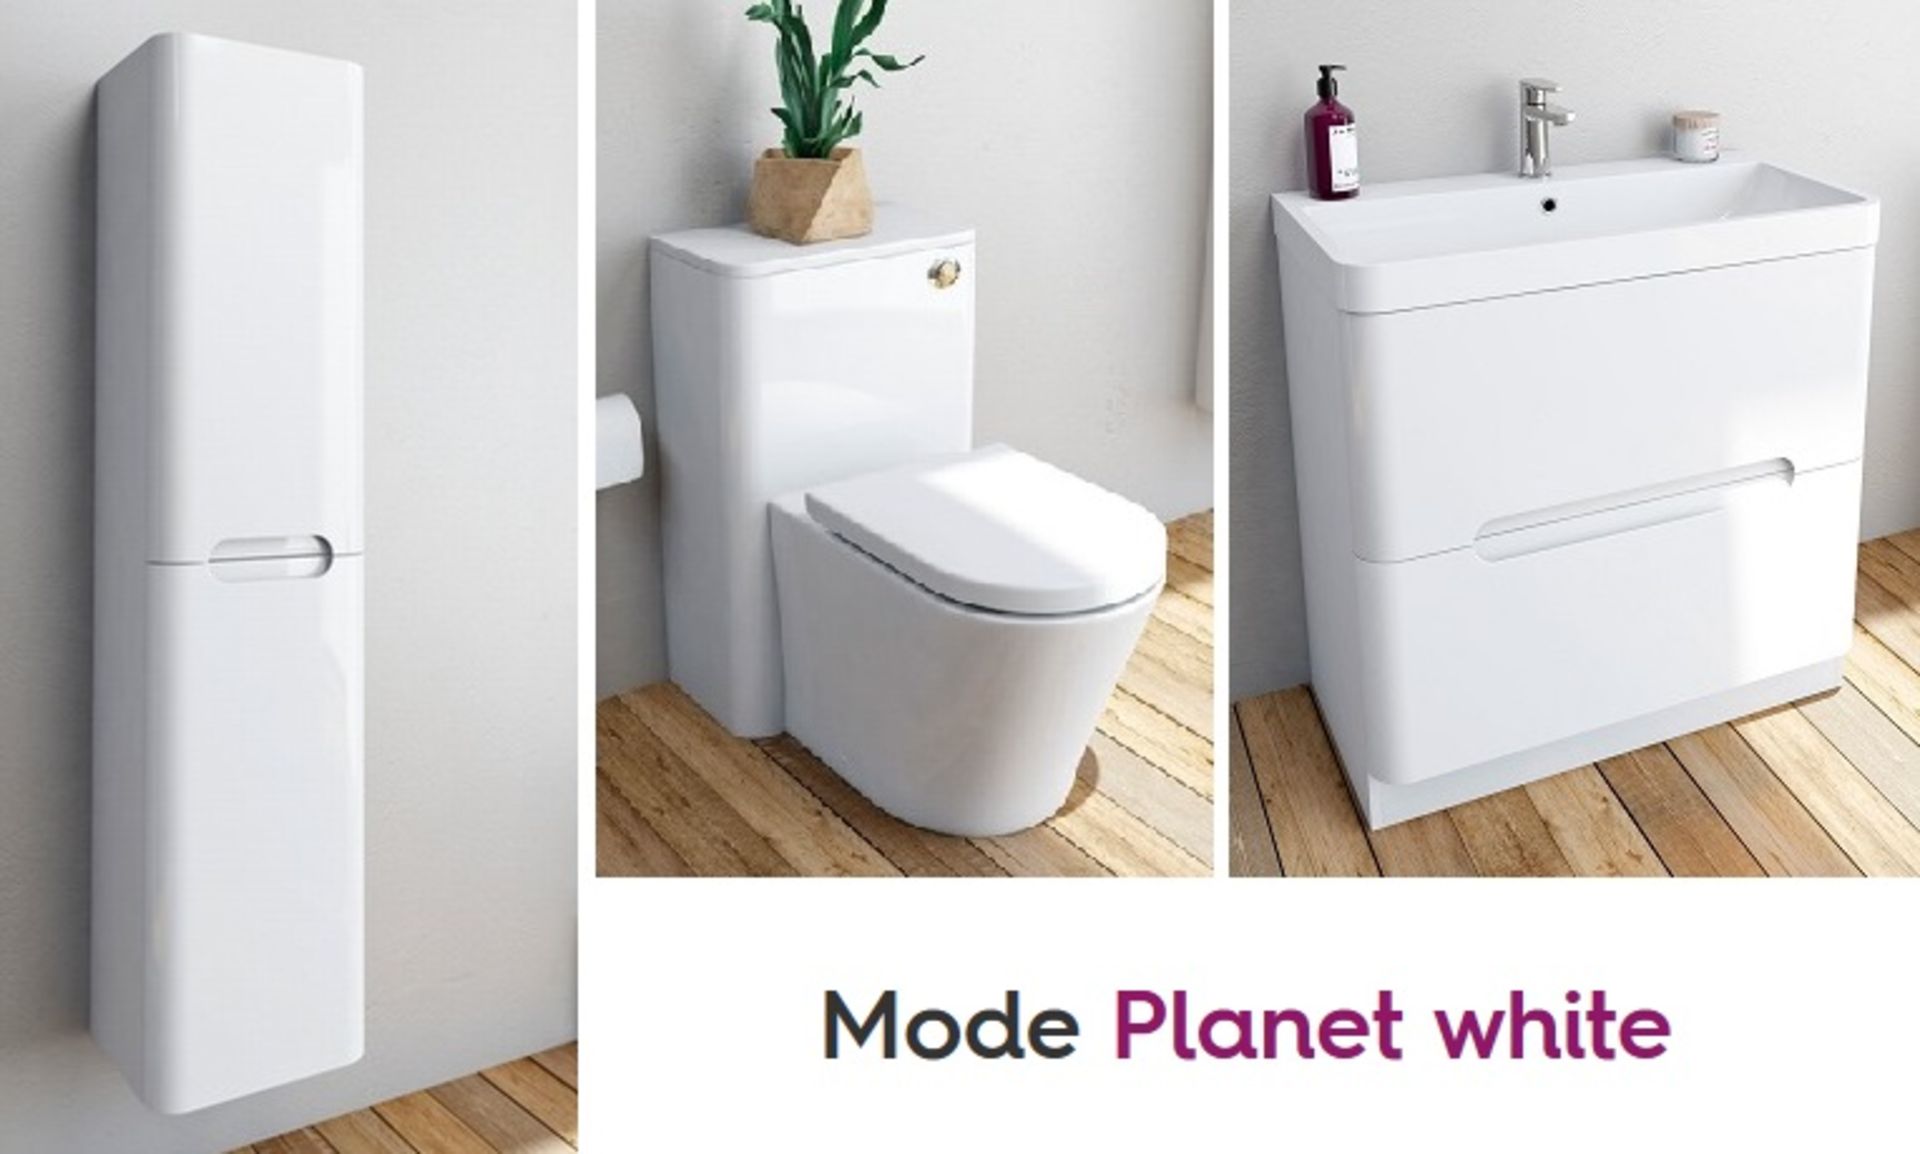 1 x Mode Planet White Gloss Bathroom Suite - Includes 600mm Vanity Soft Close Drawer Unit With